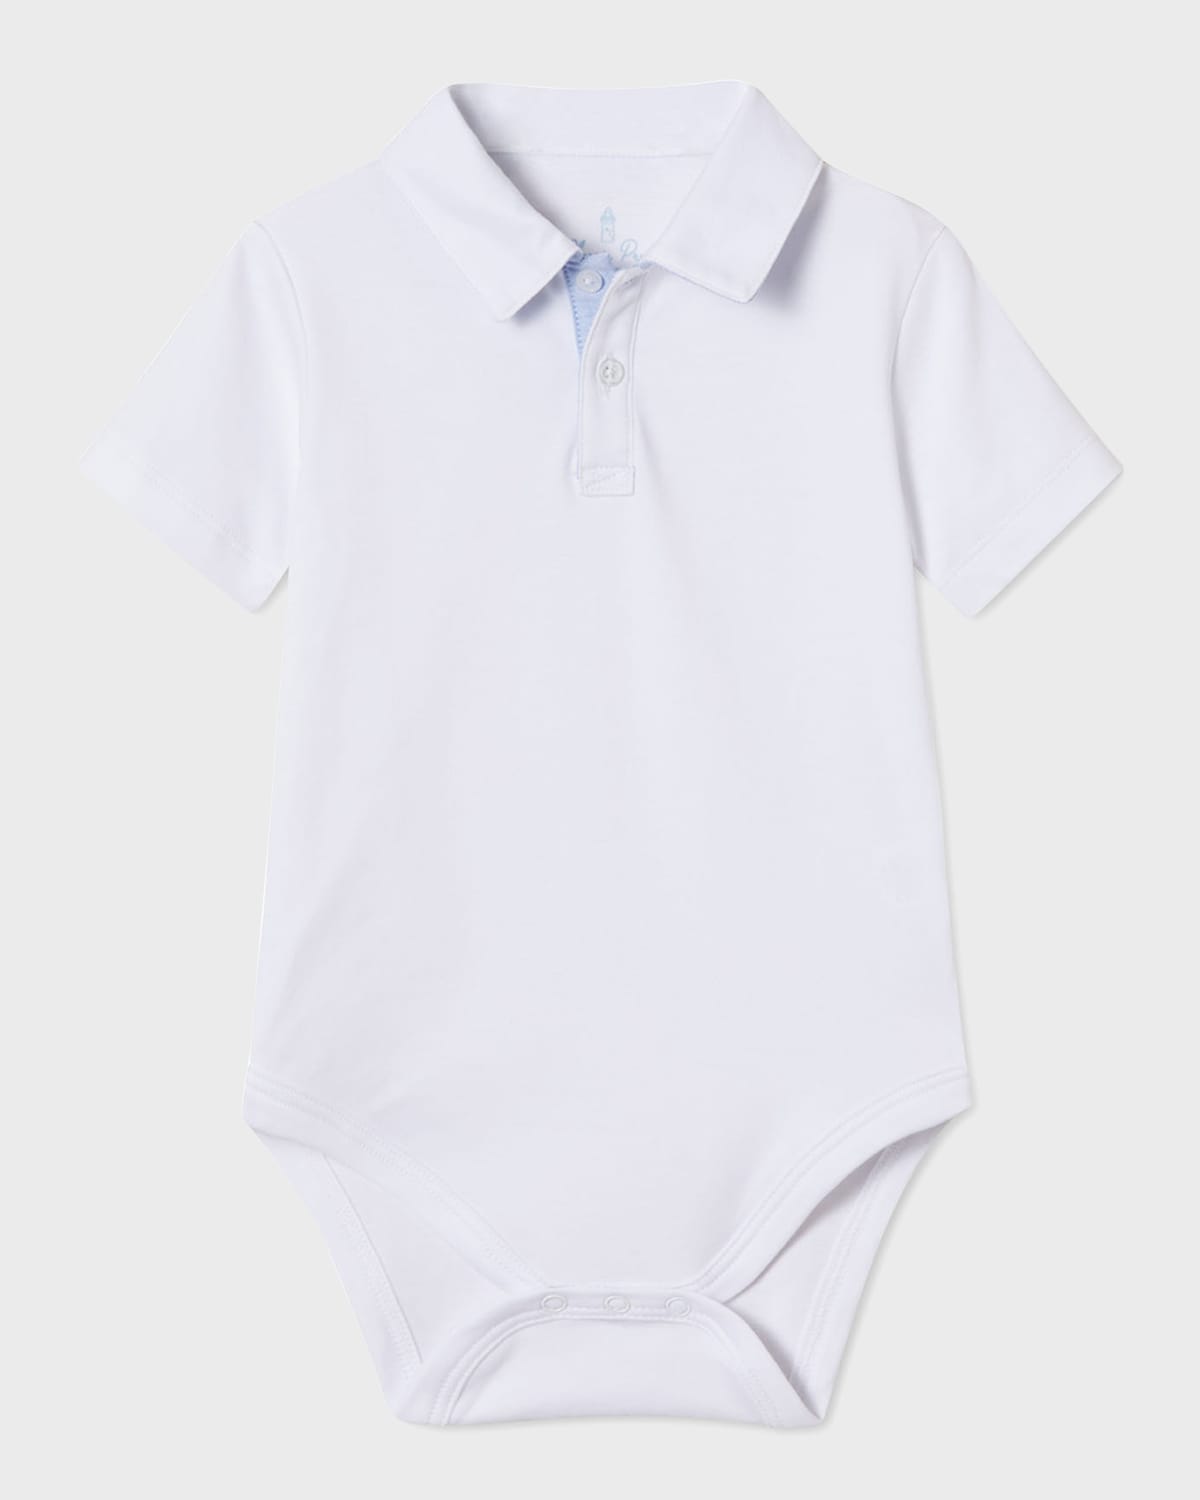 Classic Prep Childrenswear Kids' Boy's Hayes Polo Romper In Bright White With